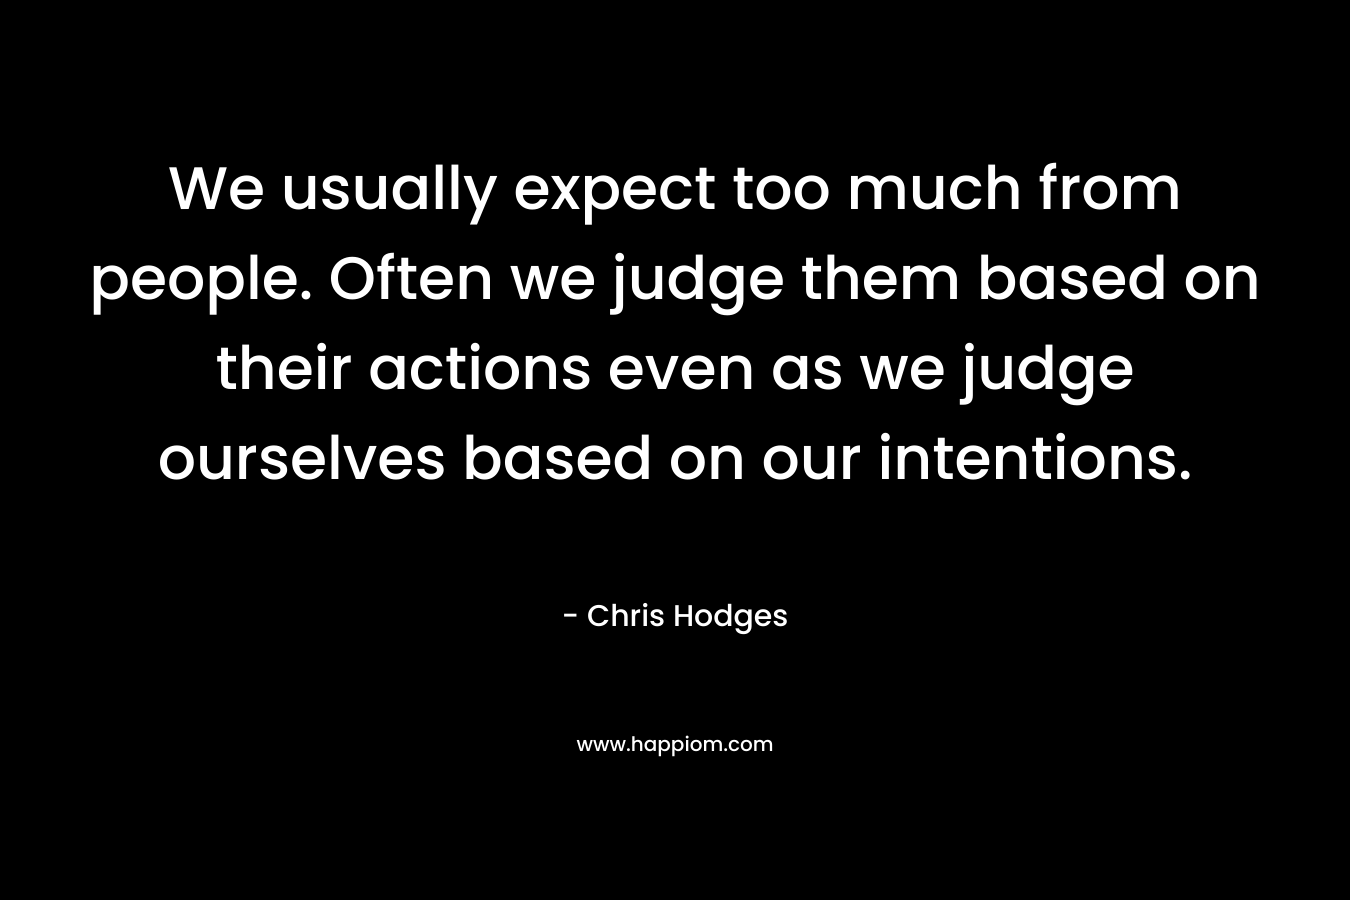 We usually expect too much from people. Often we judge them based on their actions even as we judge ourselves based on our intentions. – Chris Hodges